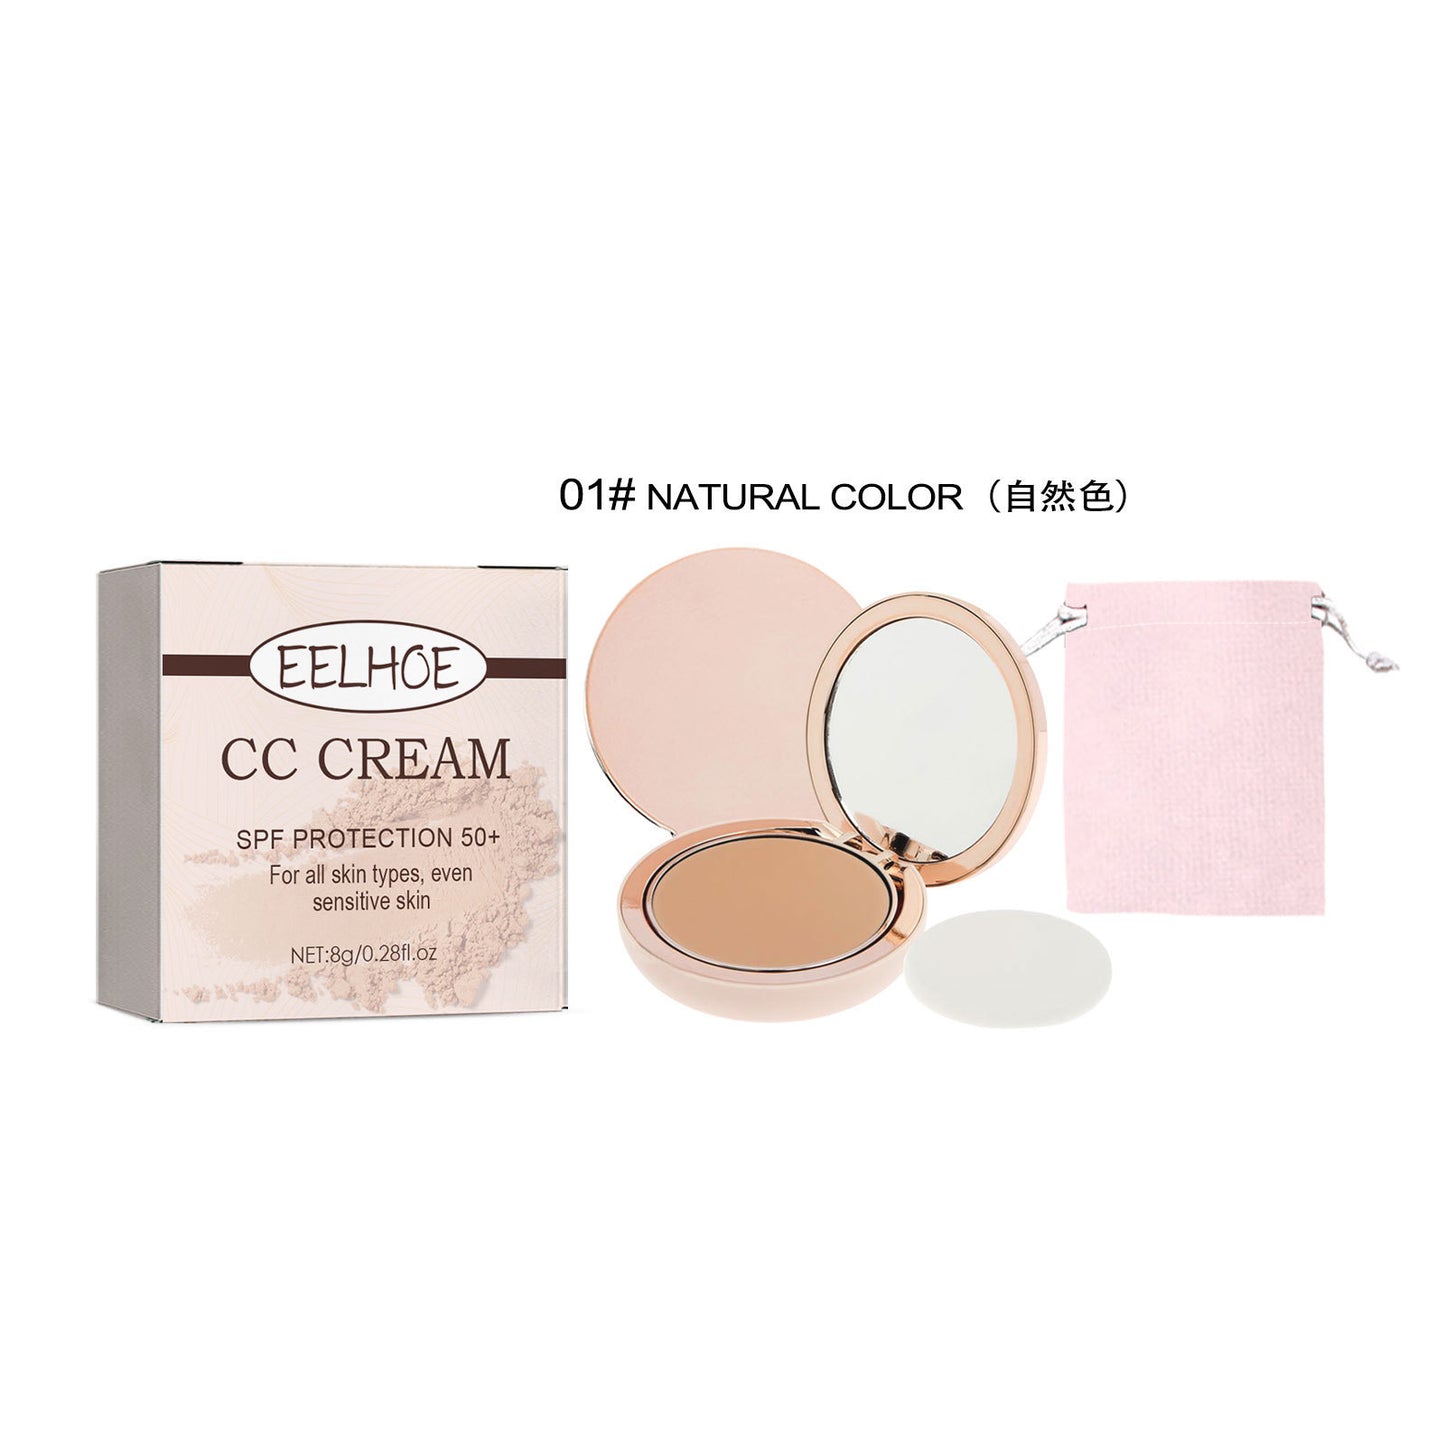 Skin Protection Lightweight Breathable Durable Not Easy To Makeup Natural Concealing And Setting Makeup Powder